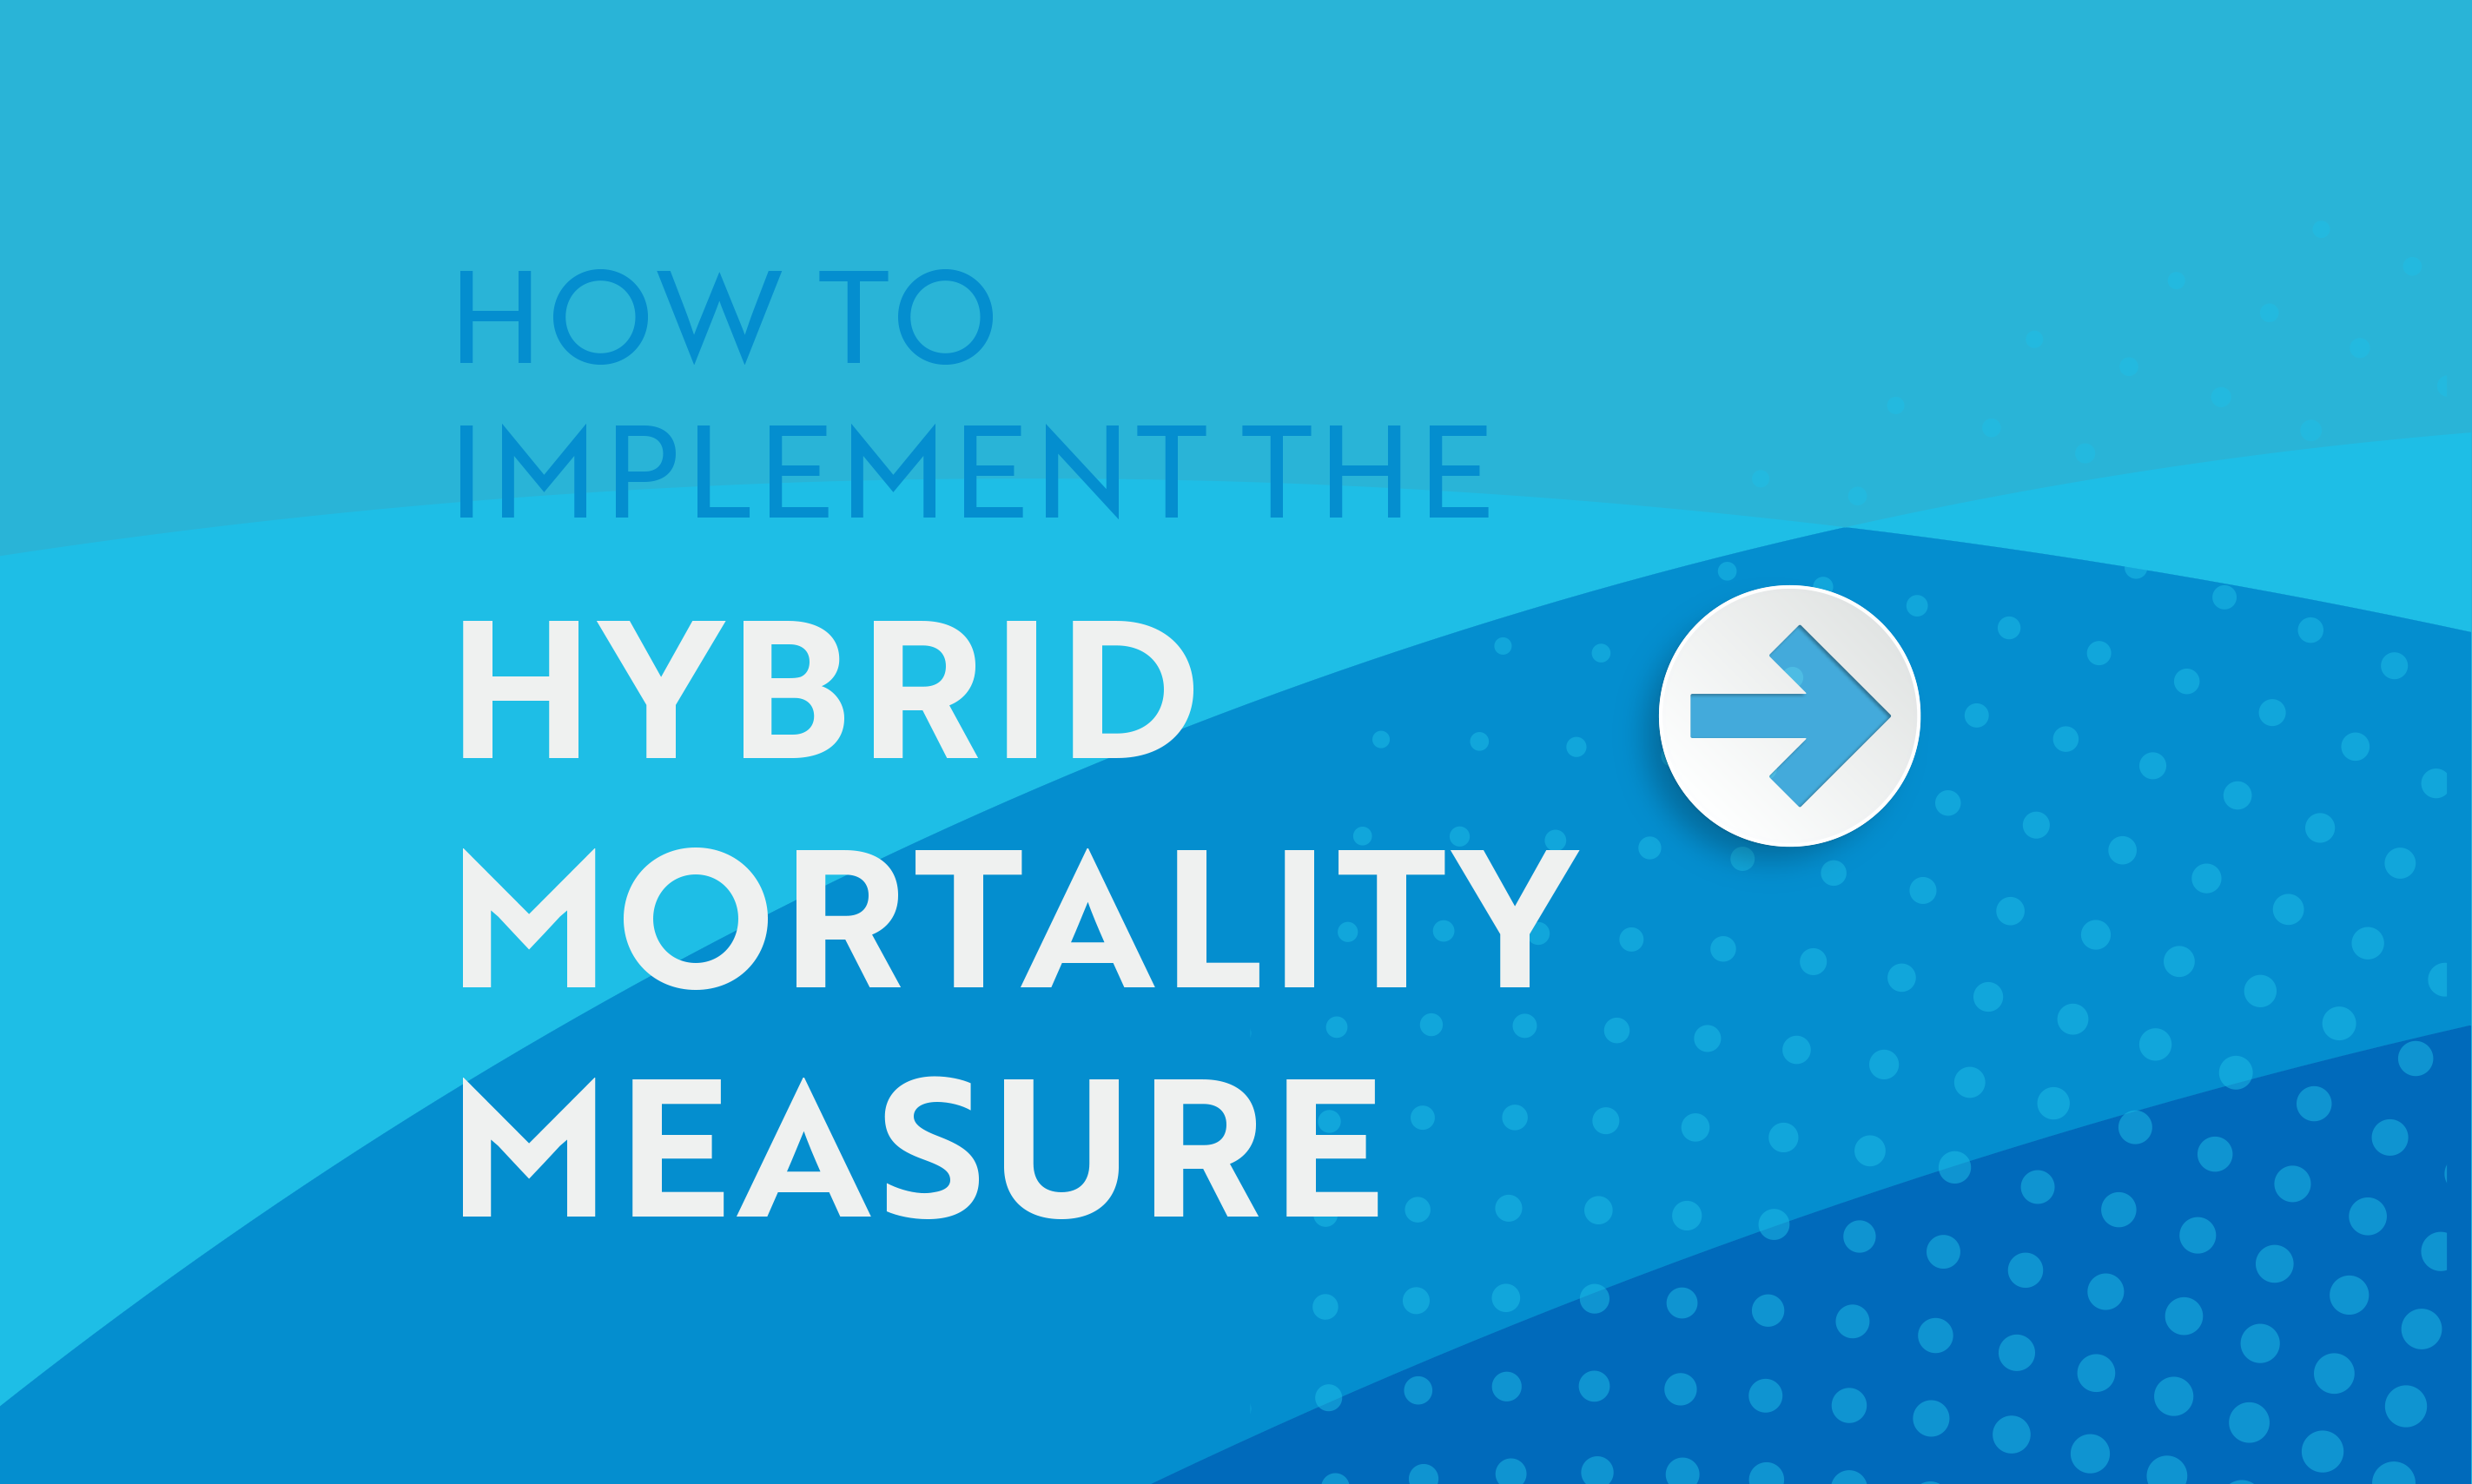 Implementing the Hybrid Mortality Measure